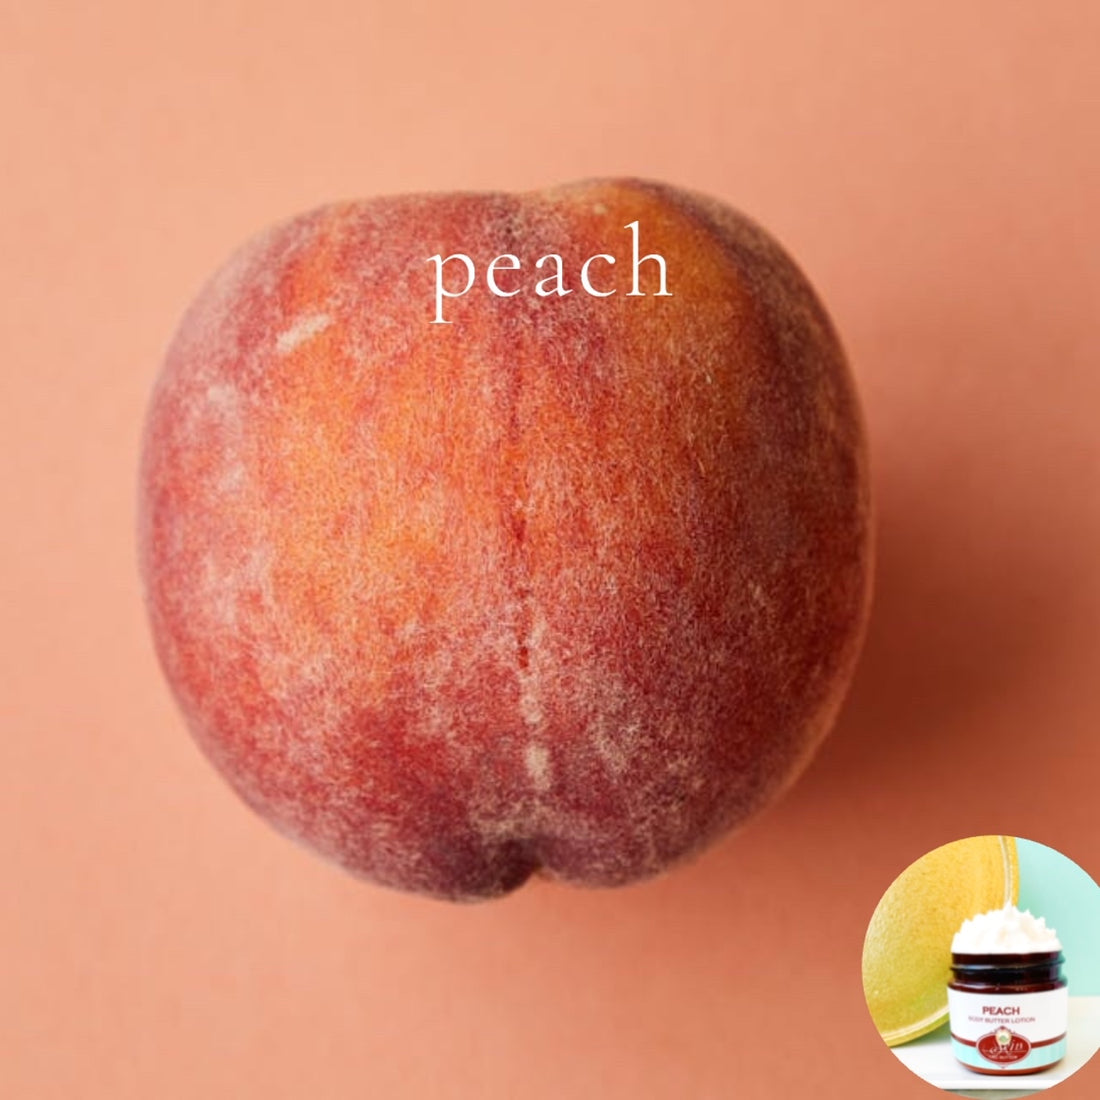 PEACH  scented Body Butter - BOGO - Buy  One 16 oz family size, get 1 any size 50% off deal